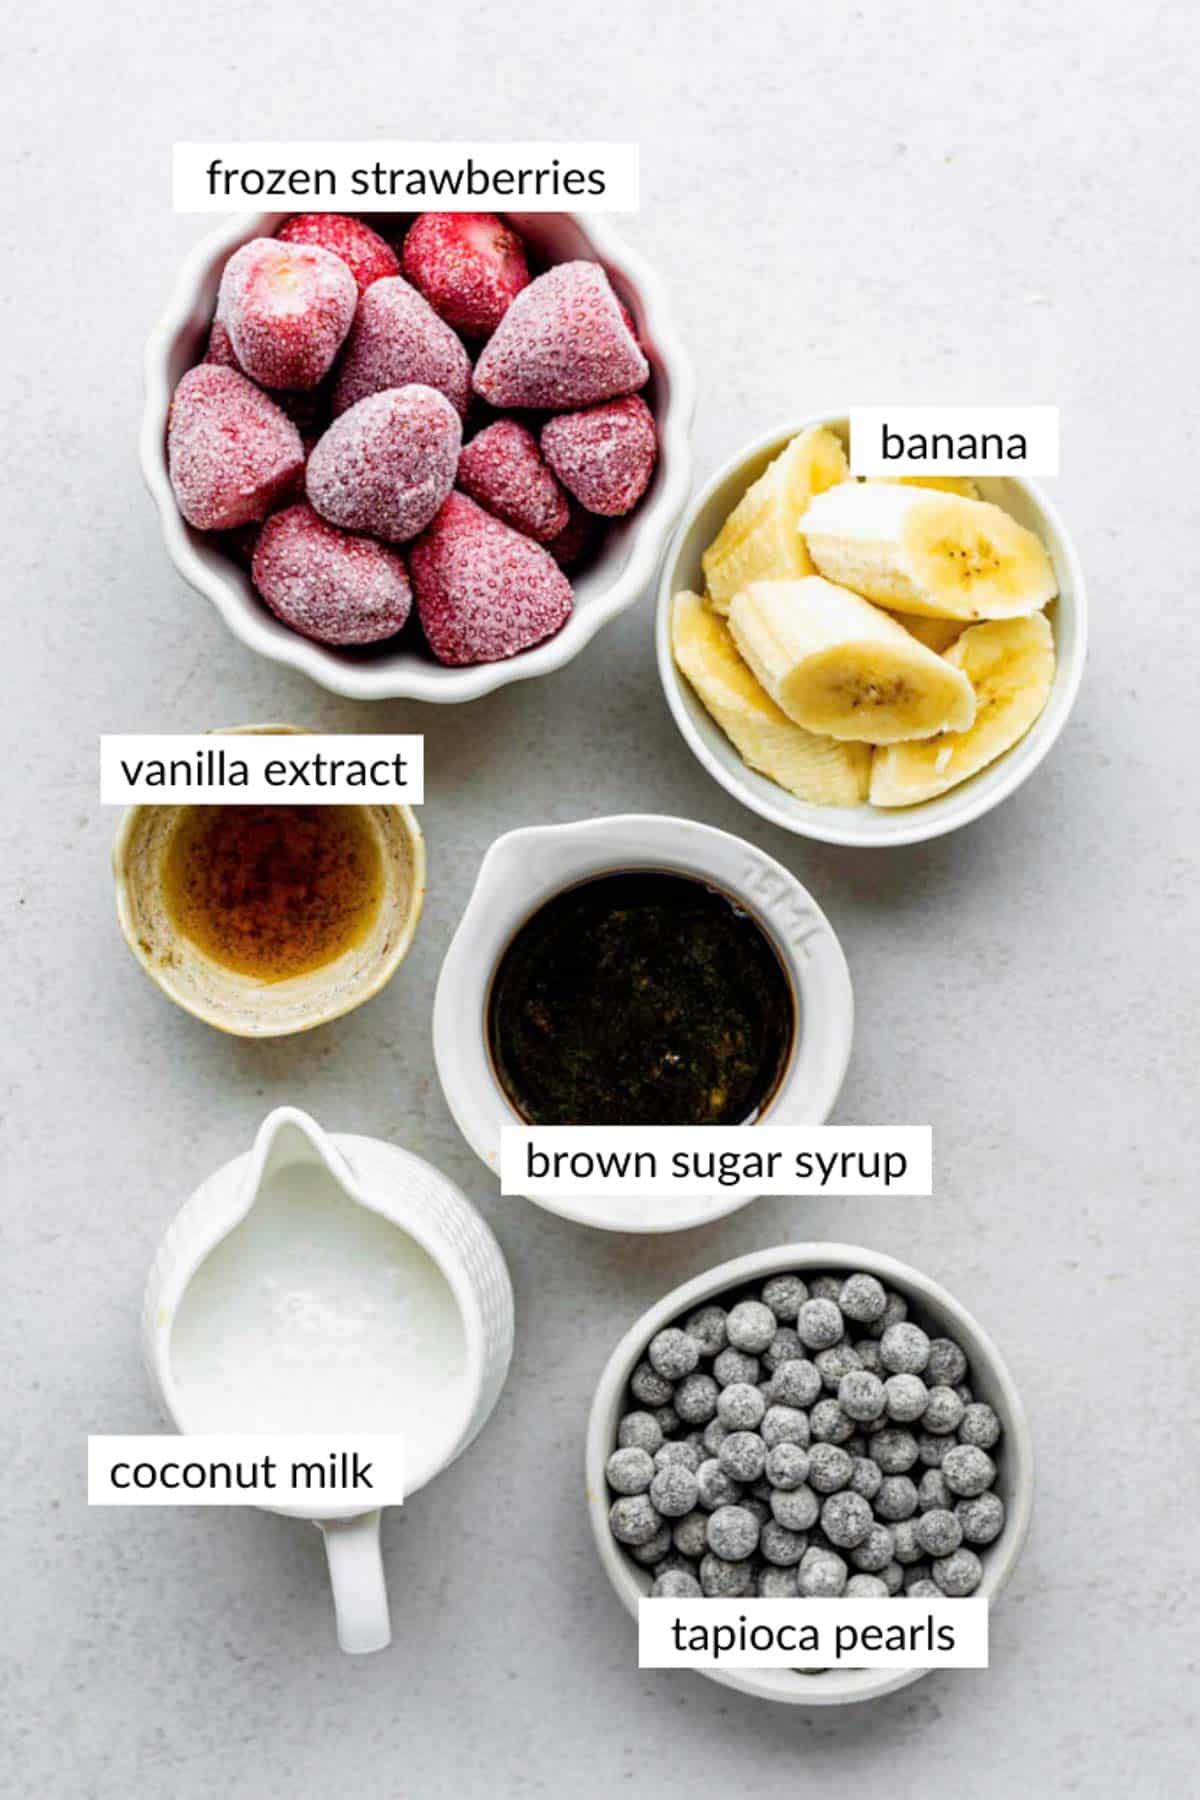 Gathered ingredients for making boba tea smoothie with text overlay on each ingredient.